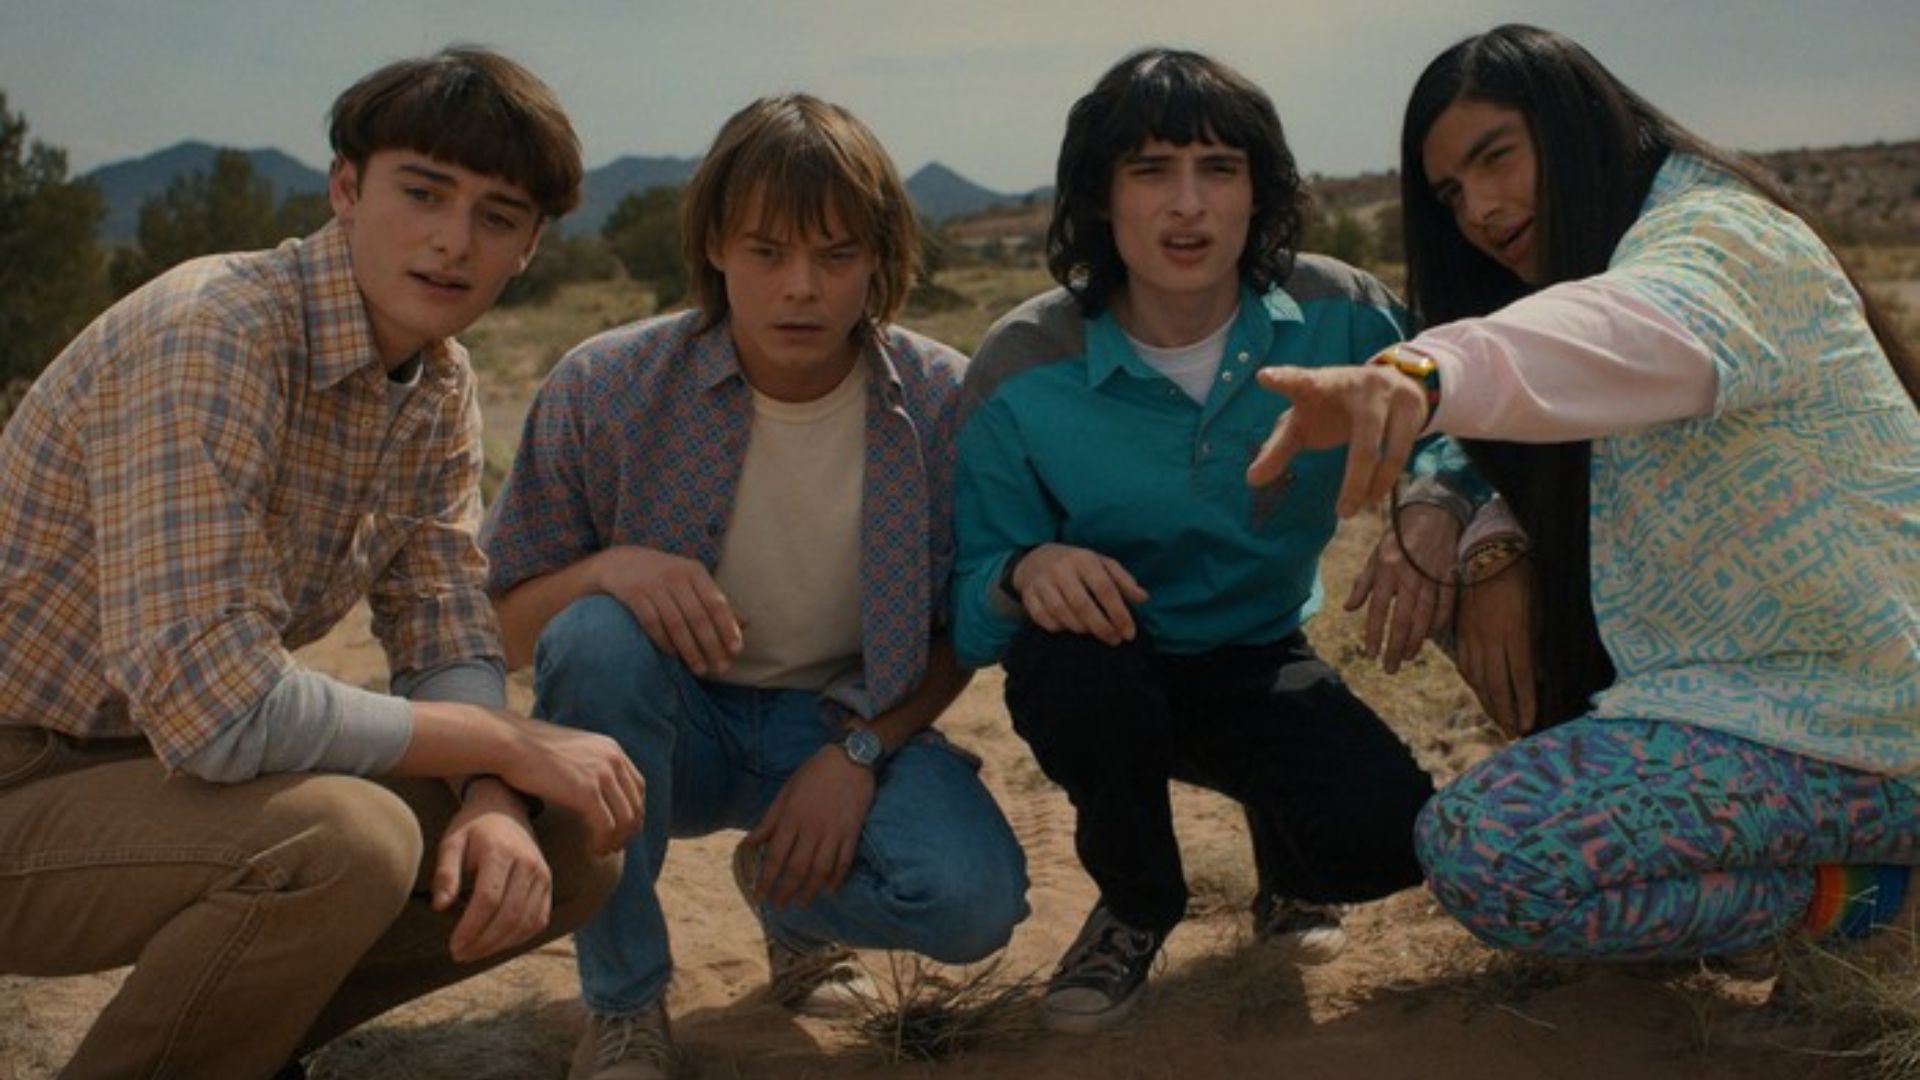 Stranger Things Season 5 teases the first few moments of episode 1